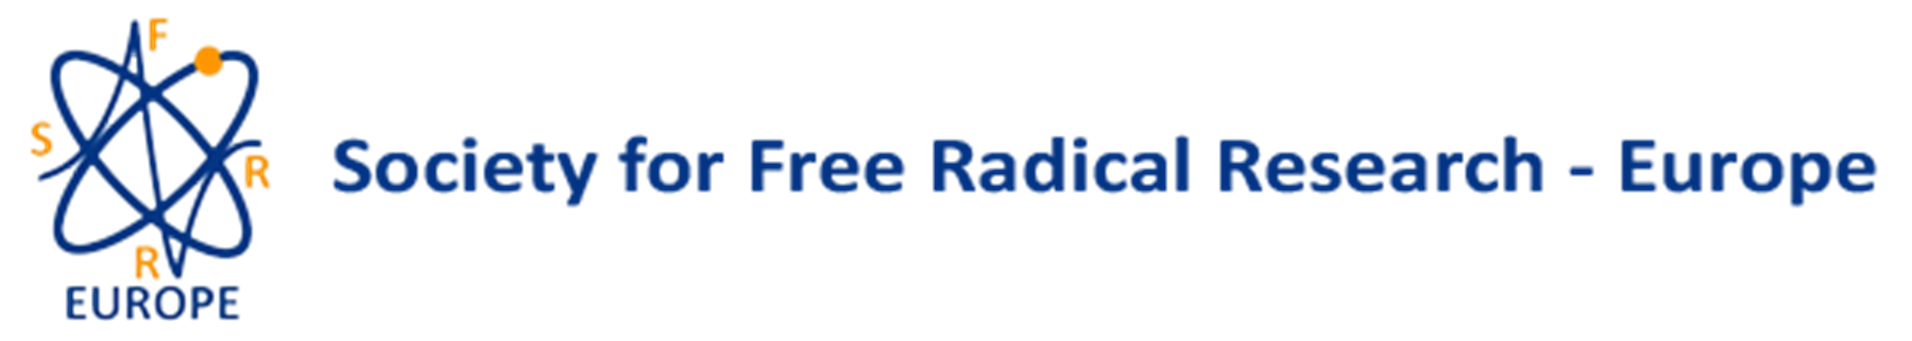 Society for Free Radical Research Europe